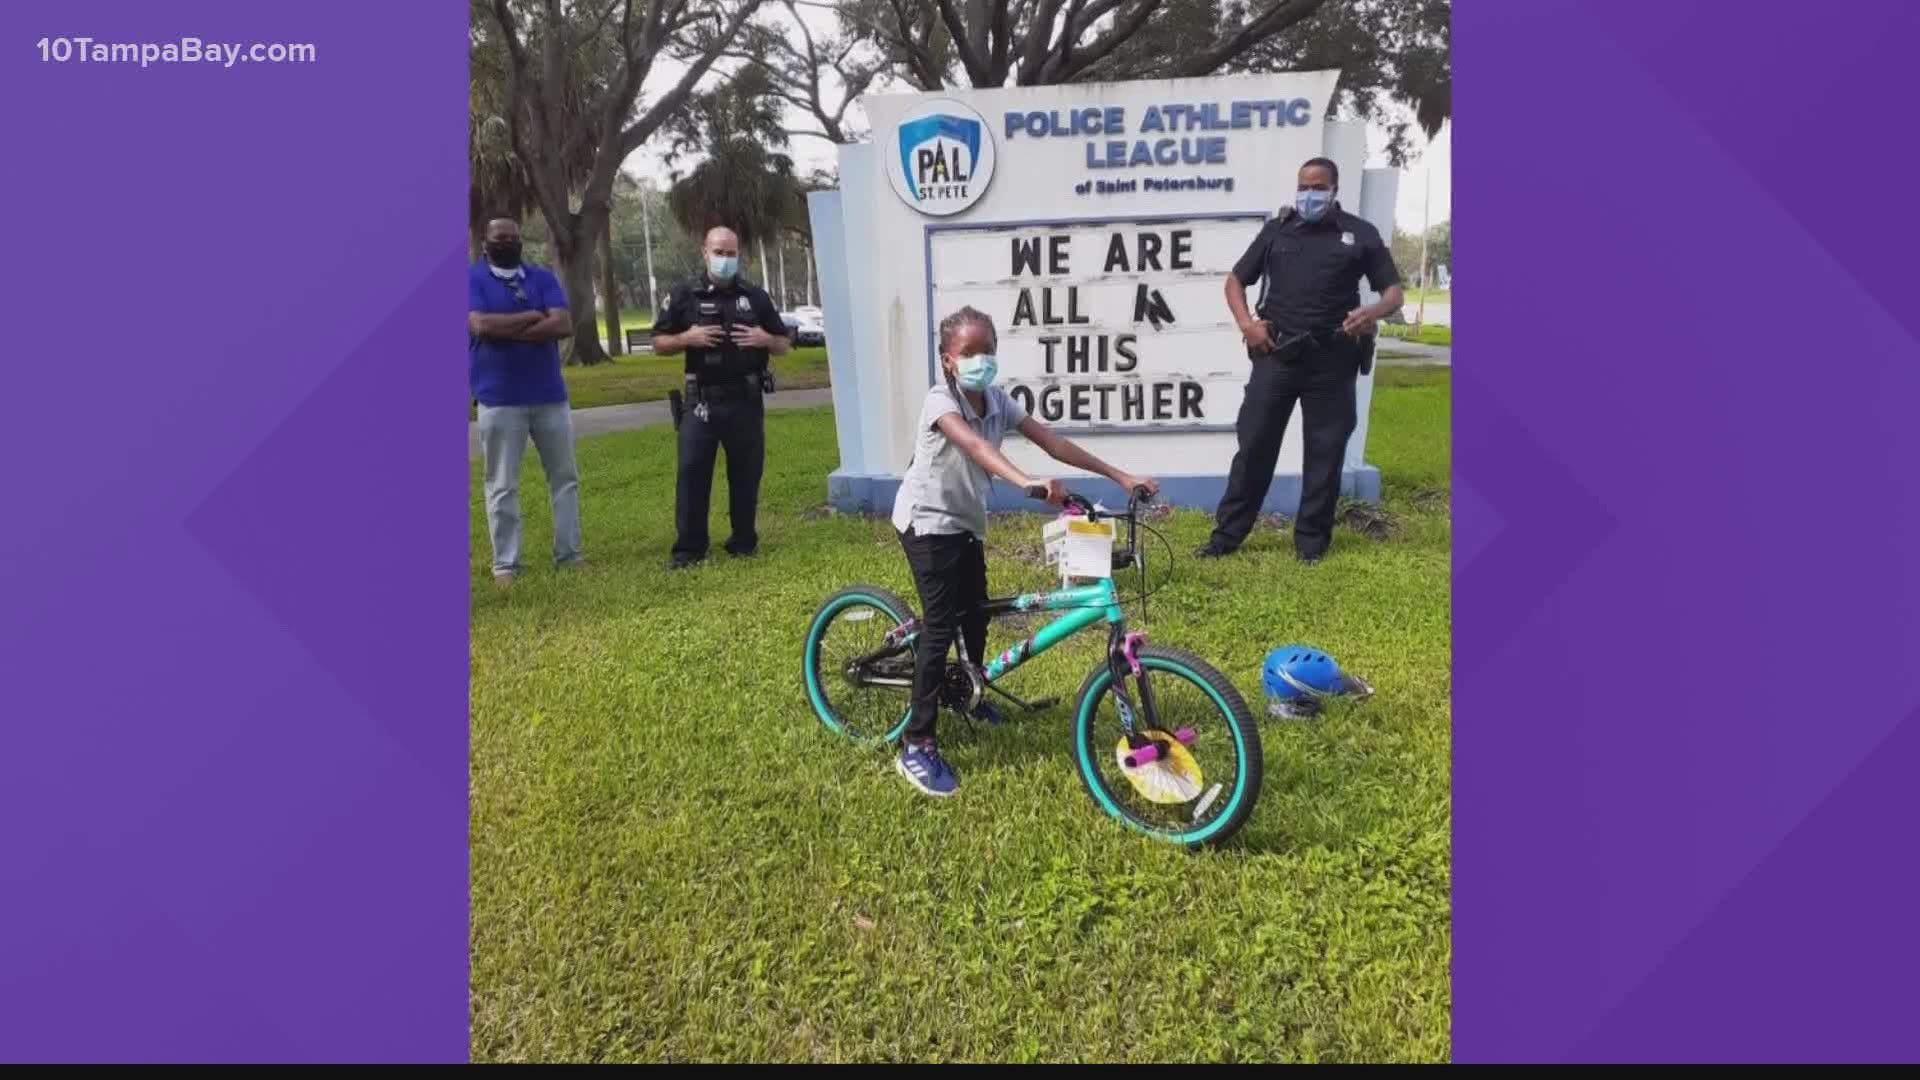 Officers surprised her with the new bike and even took it a step further by pitching in for a helmet to keep her safe.